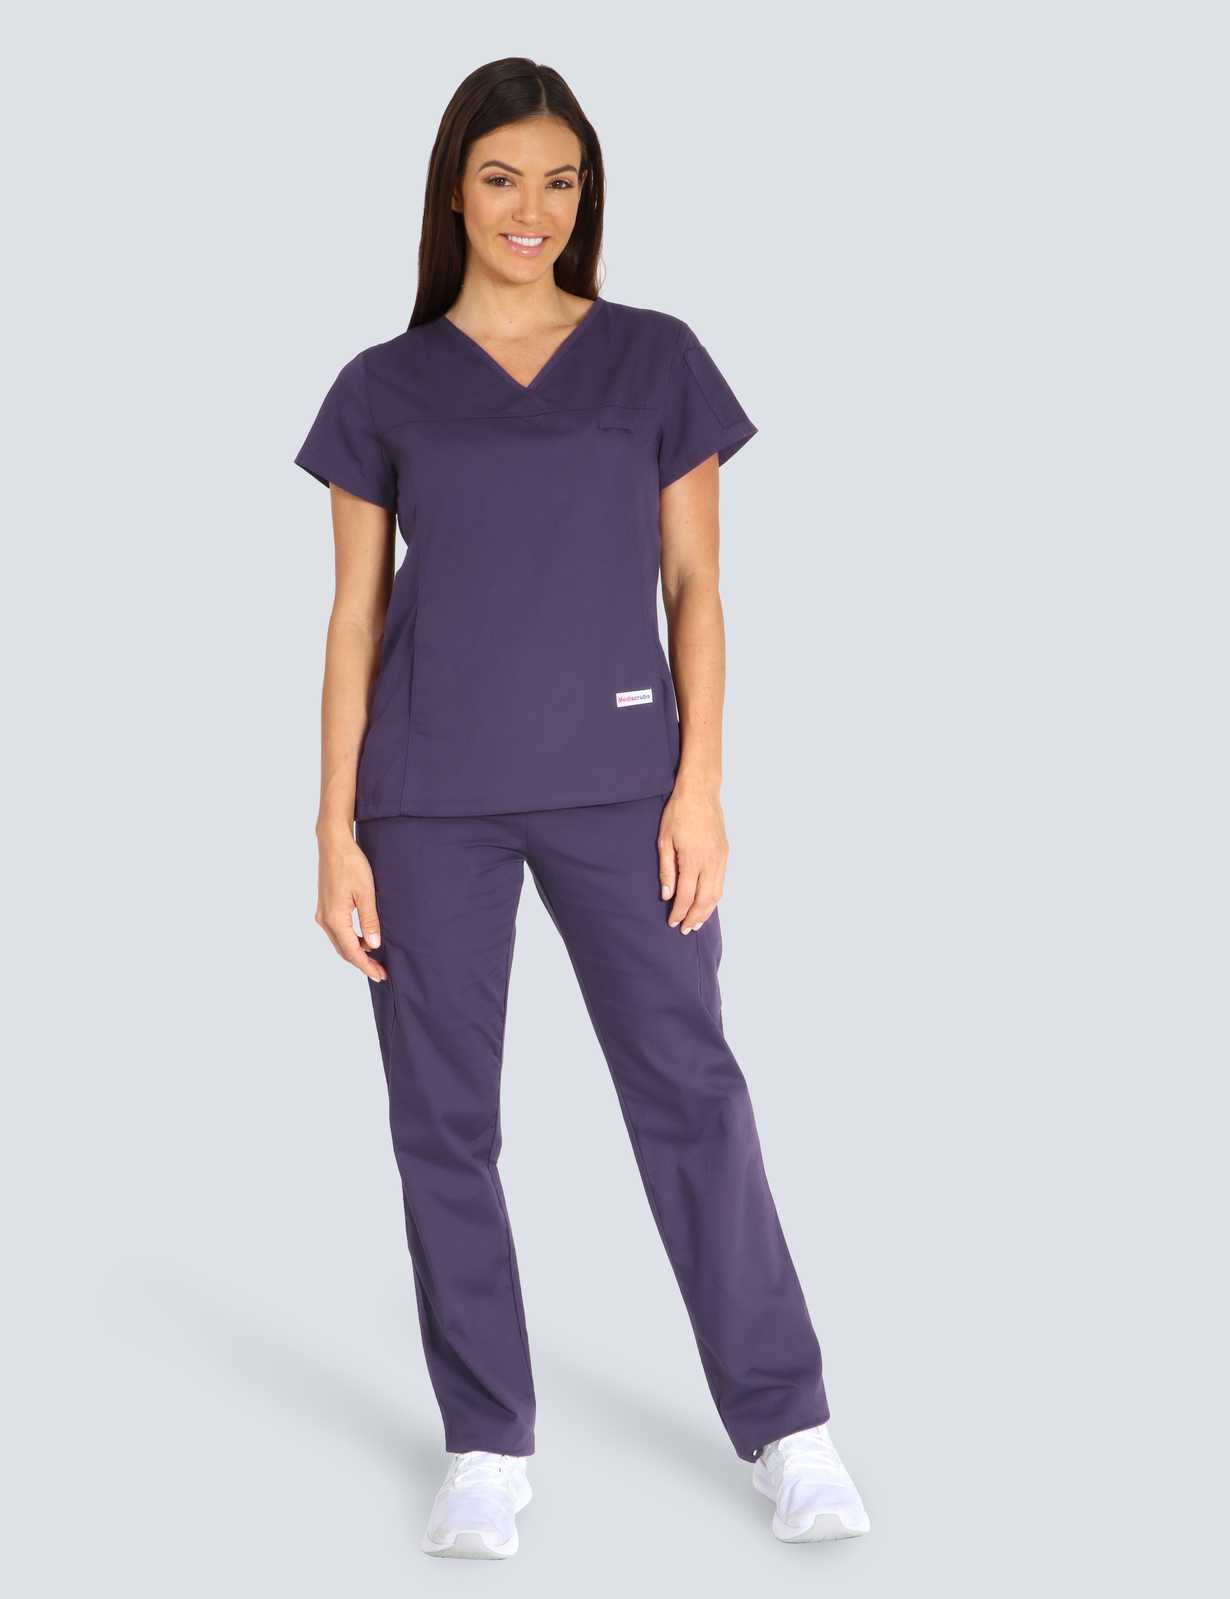 Toowoomba Hospital Pharmacist Interns Uniform Set Bundle (Women's Fit Solid Top and Cargo Pants in Aubergine incl Logos)